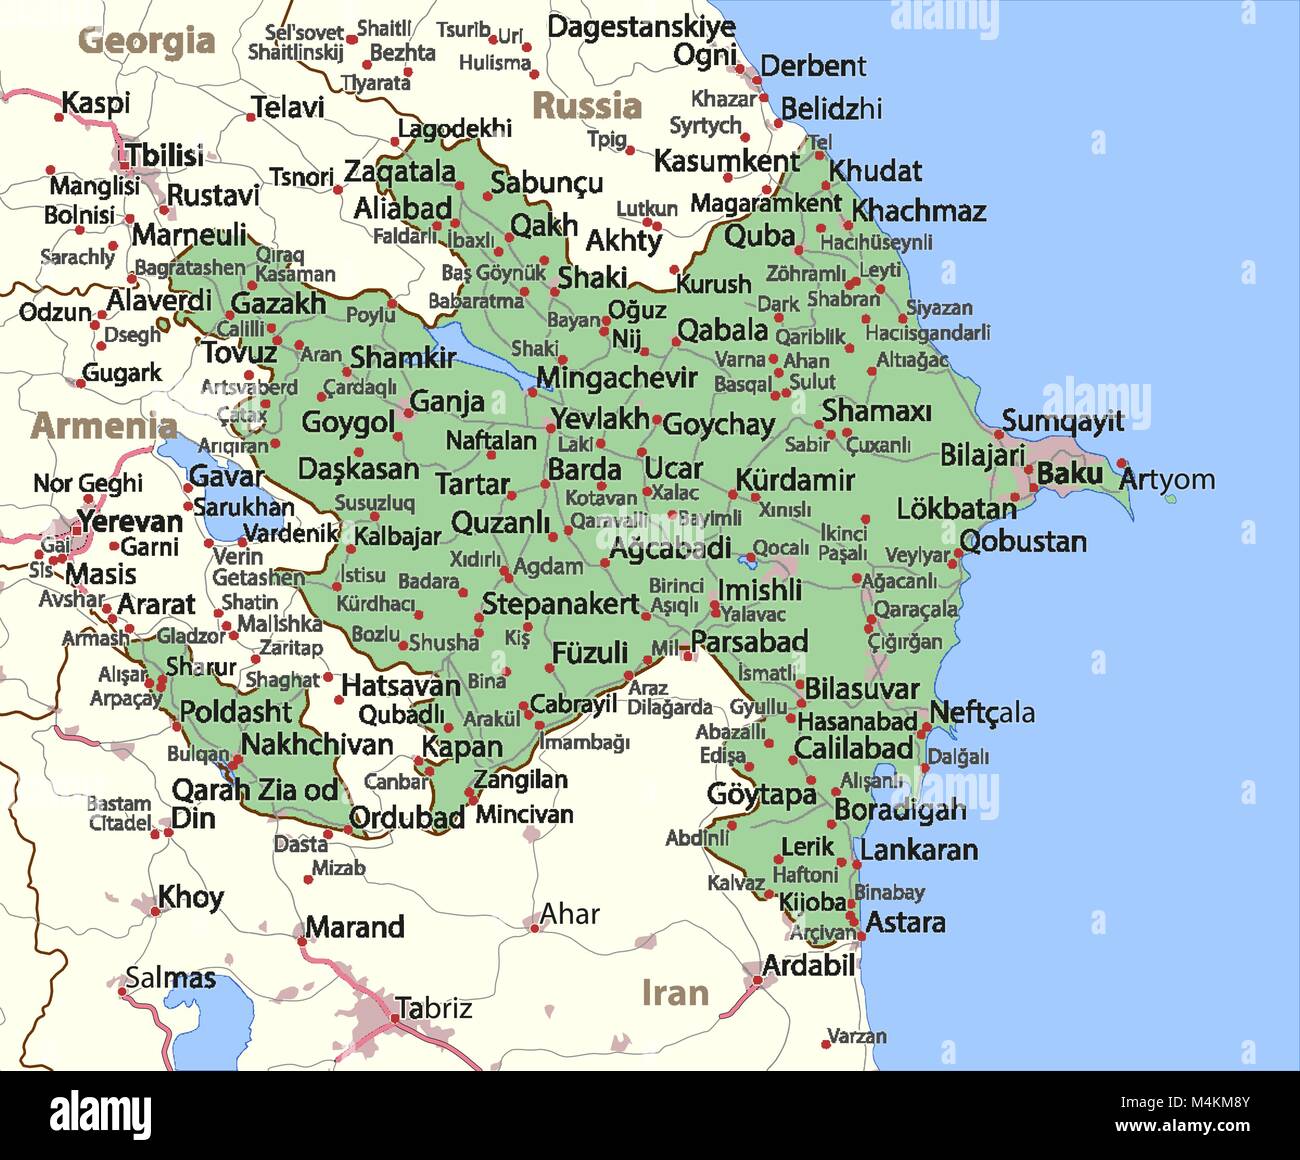 Map of Azerbaijan. Shows country borders, urban areas, place names and roads. Labels in English where possible. Projection: Mercator. Stock Vector